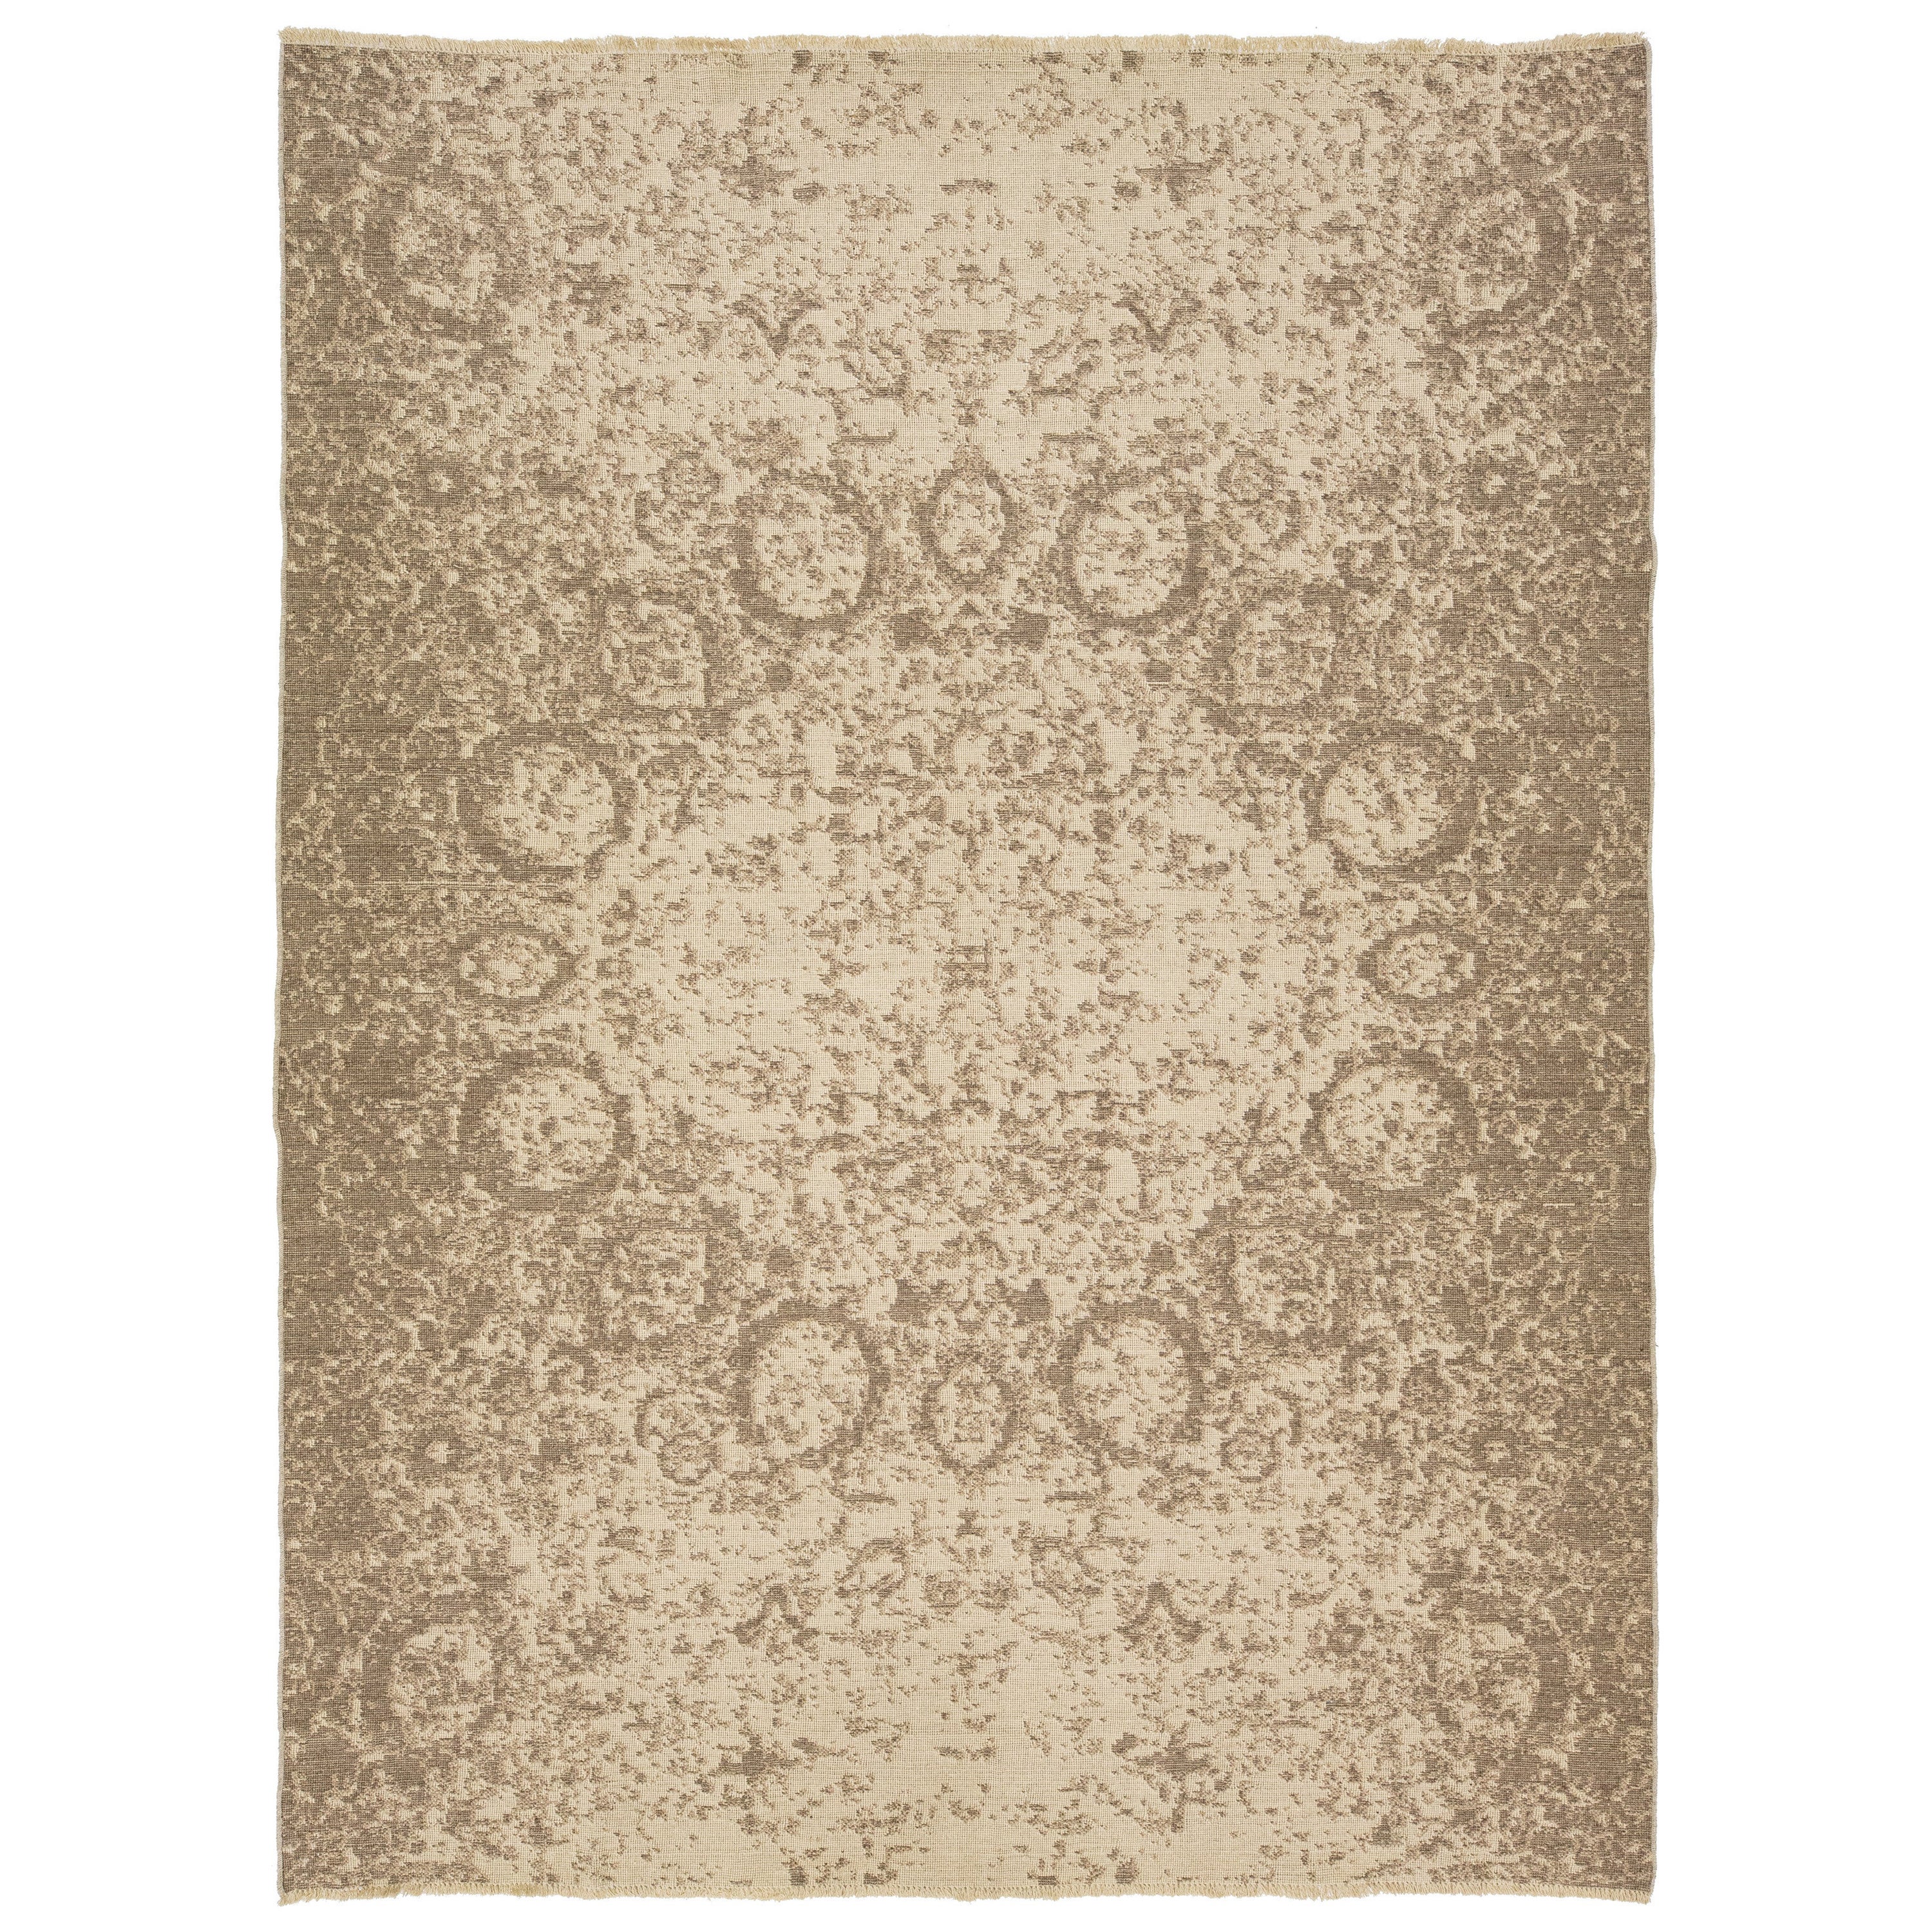 Contemporary Room Size Wool Rug Hand Loom In Beige With Center Design